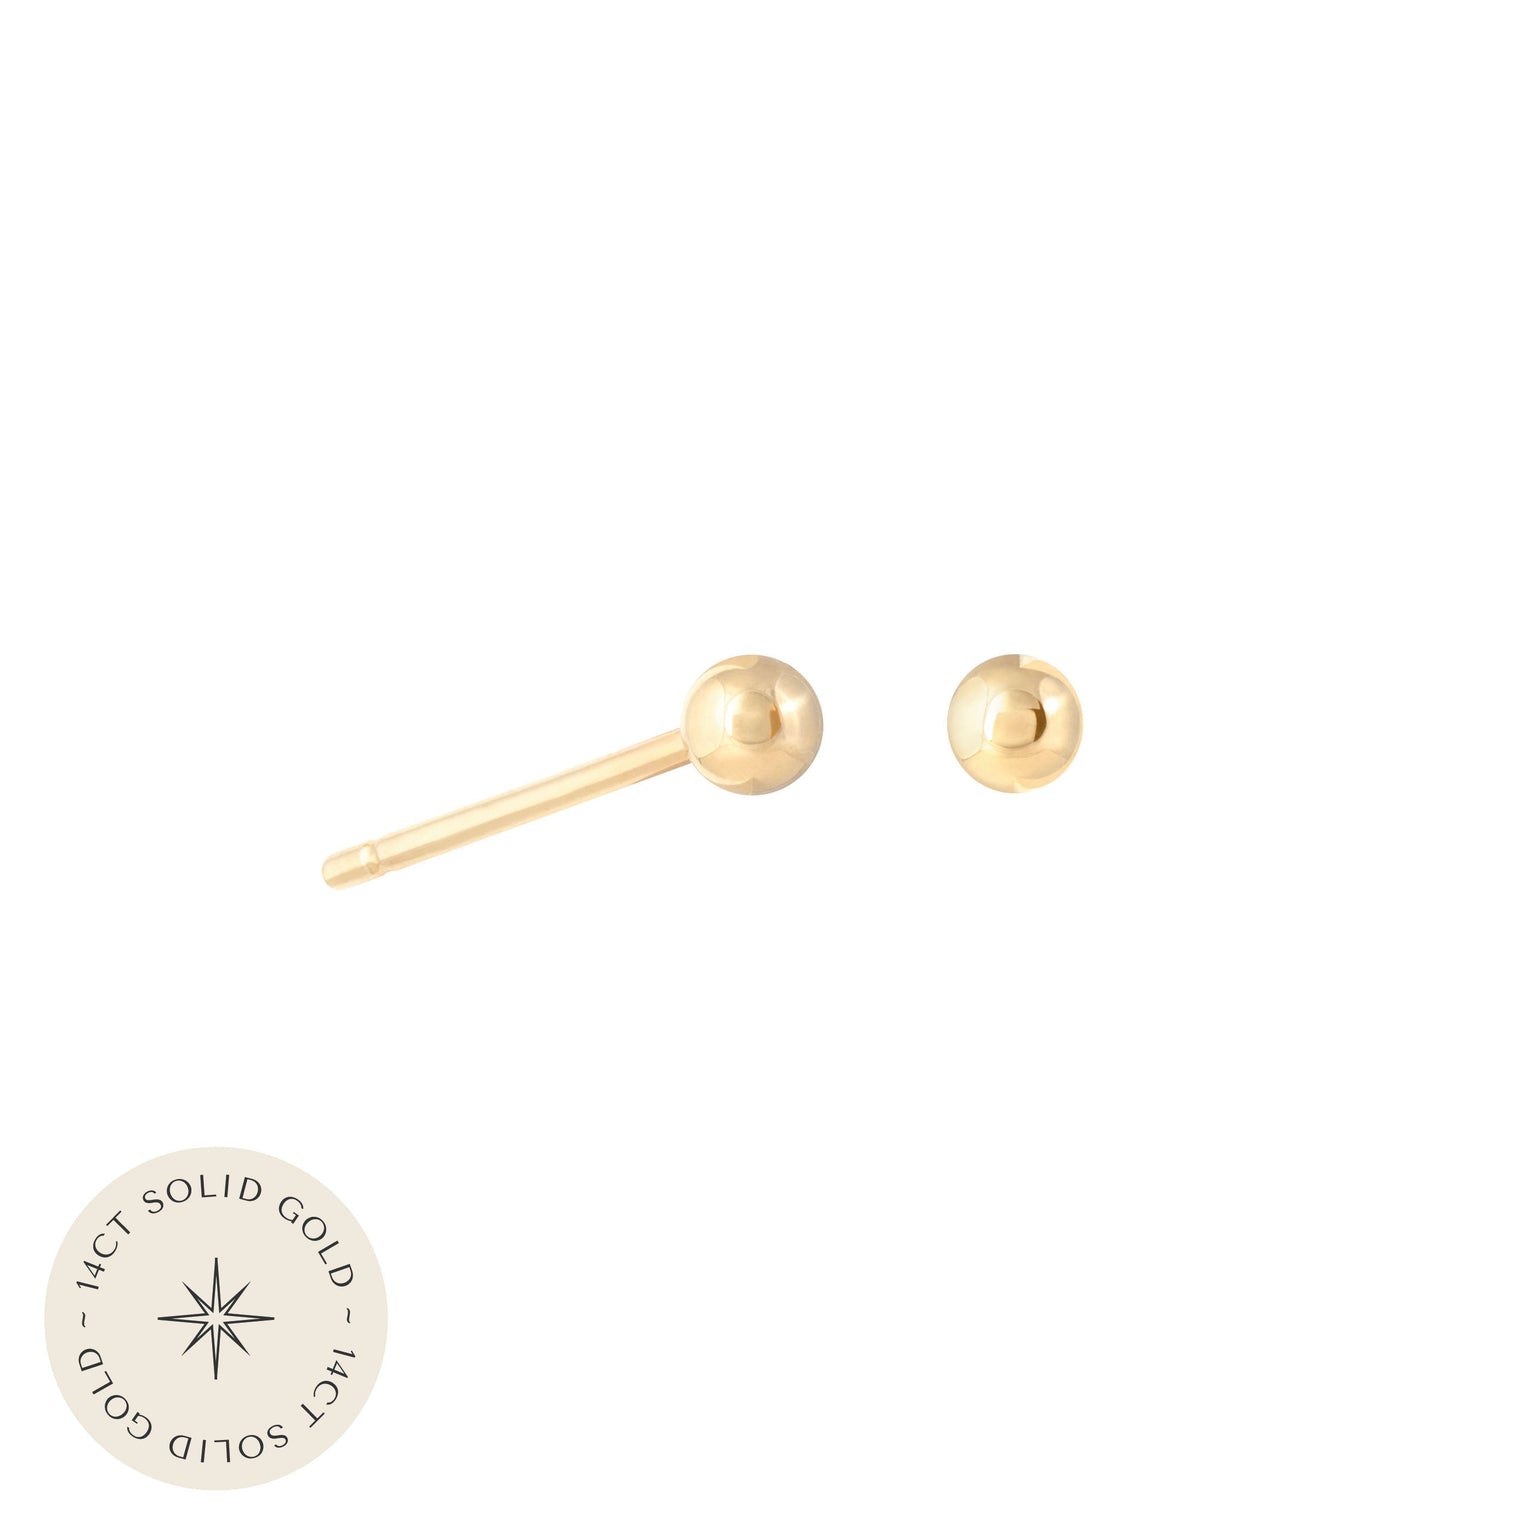 Large Ball Stud Earrings in Solid Gold with 14CT solid gold label